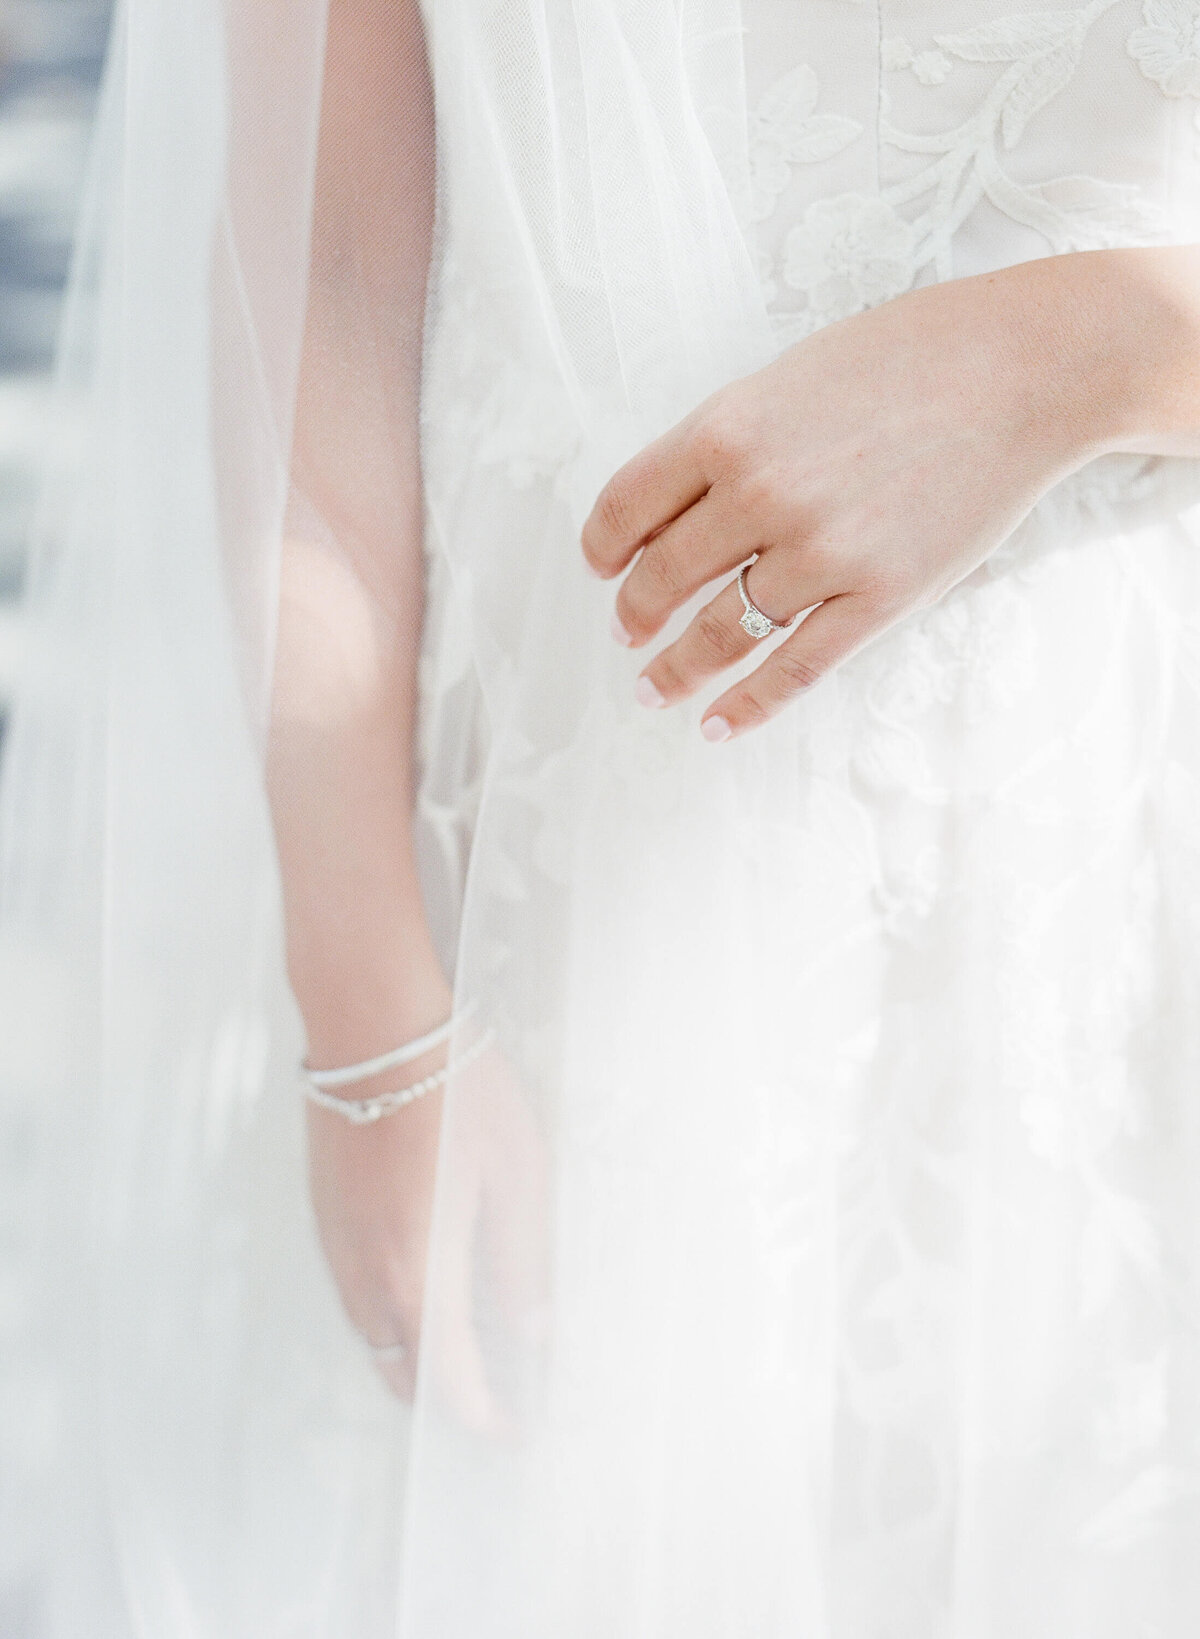 Lucky bride displays her wedding ring in front of her white wedding gown.